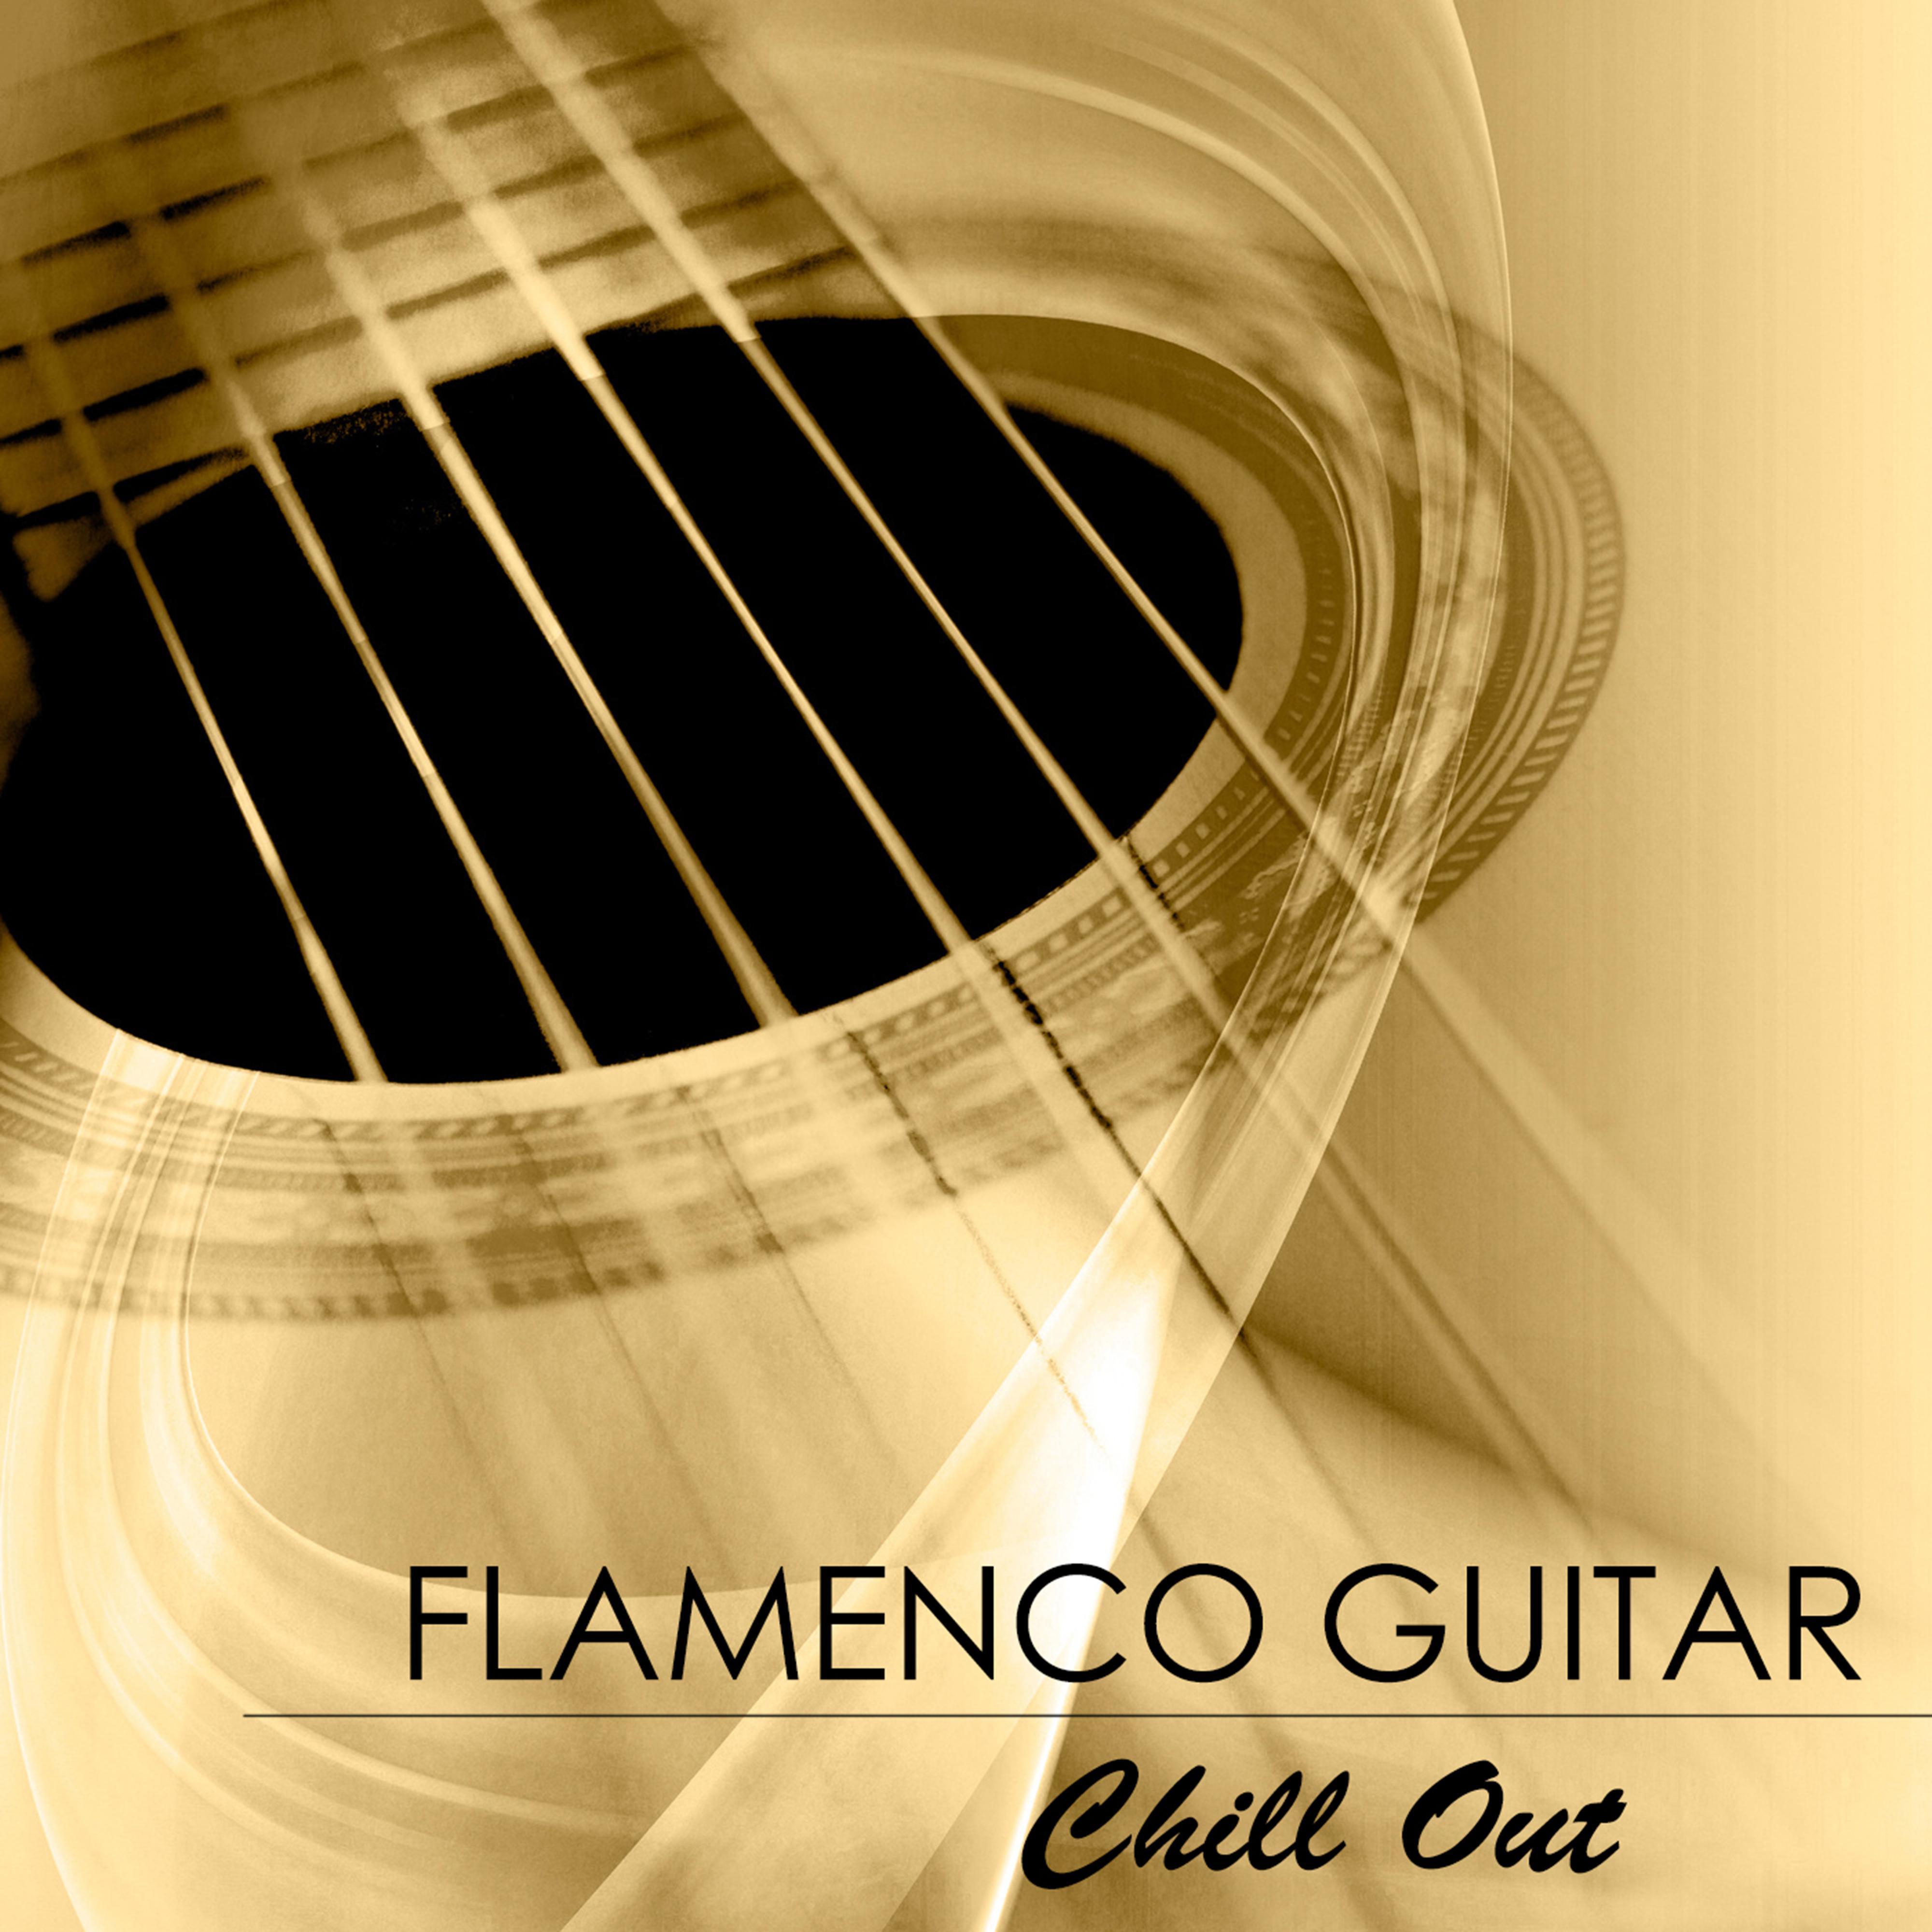 Flamenco Guitar Chill Out - **** Chillout Guitar Music